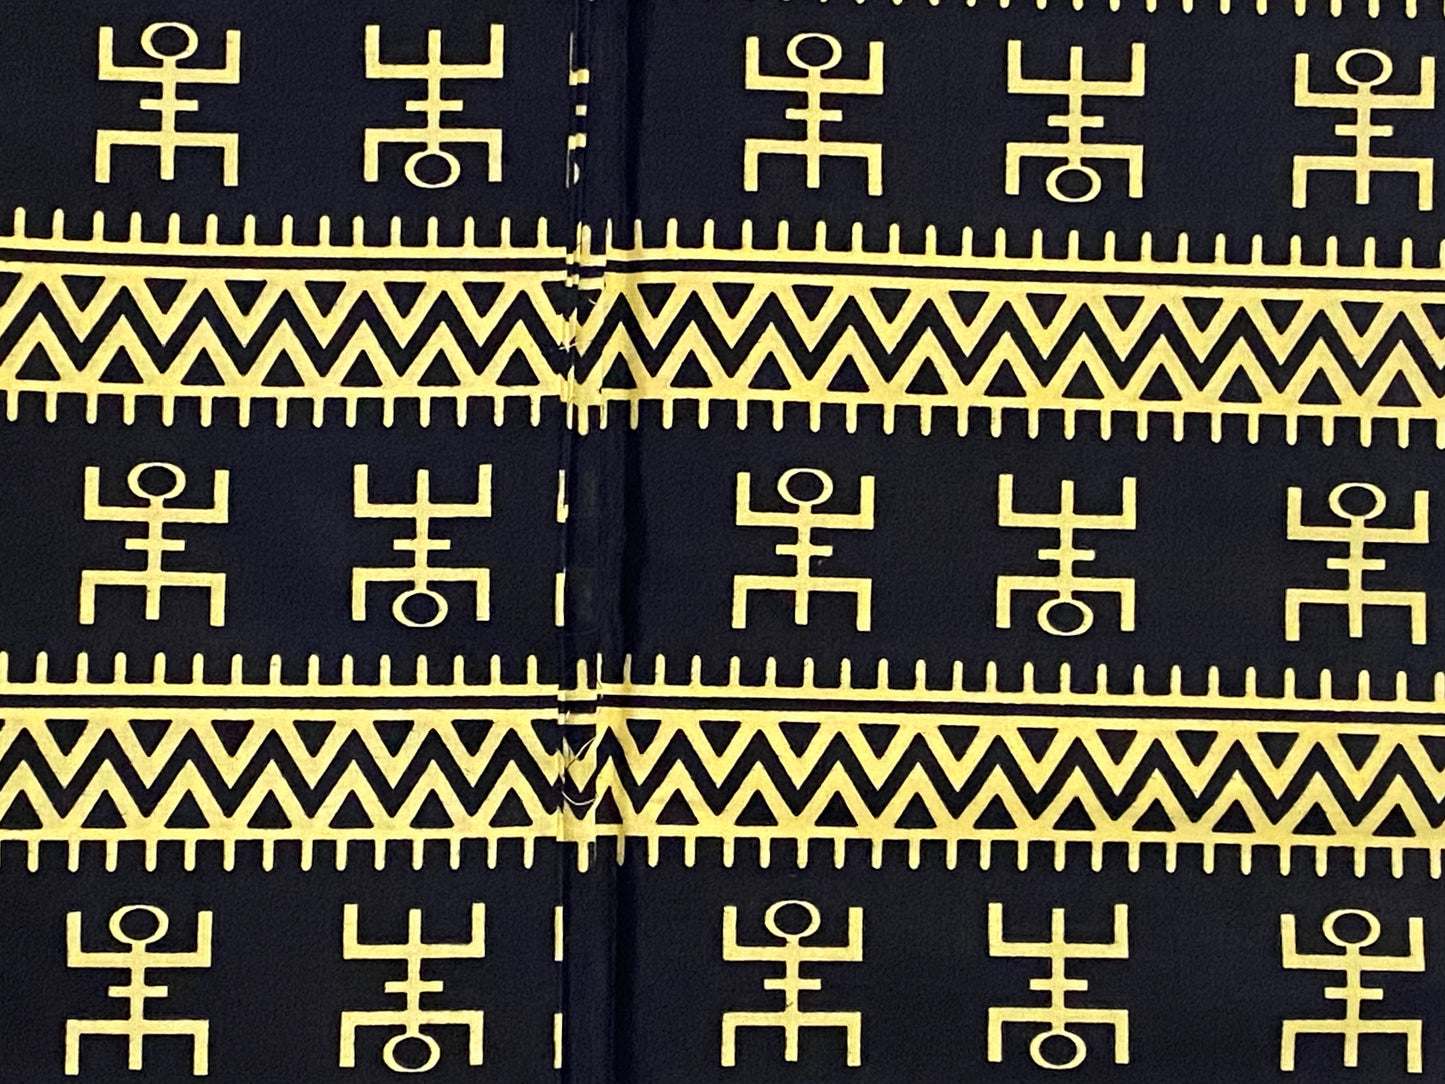 #3483 African Kente Cloth Cotton Fabric,6 Yards by 43"